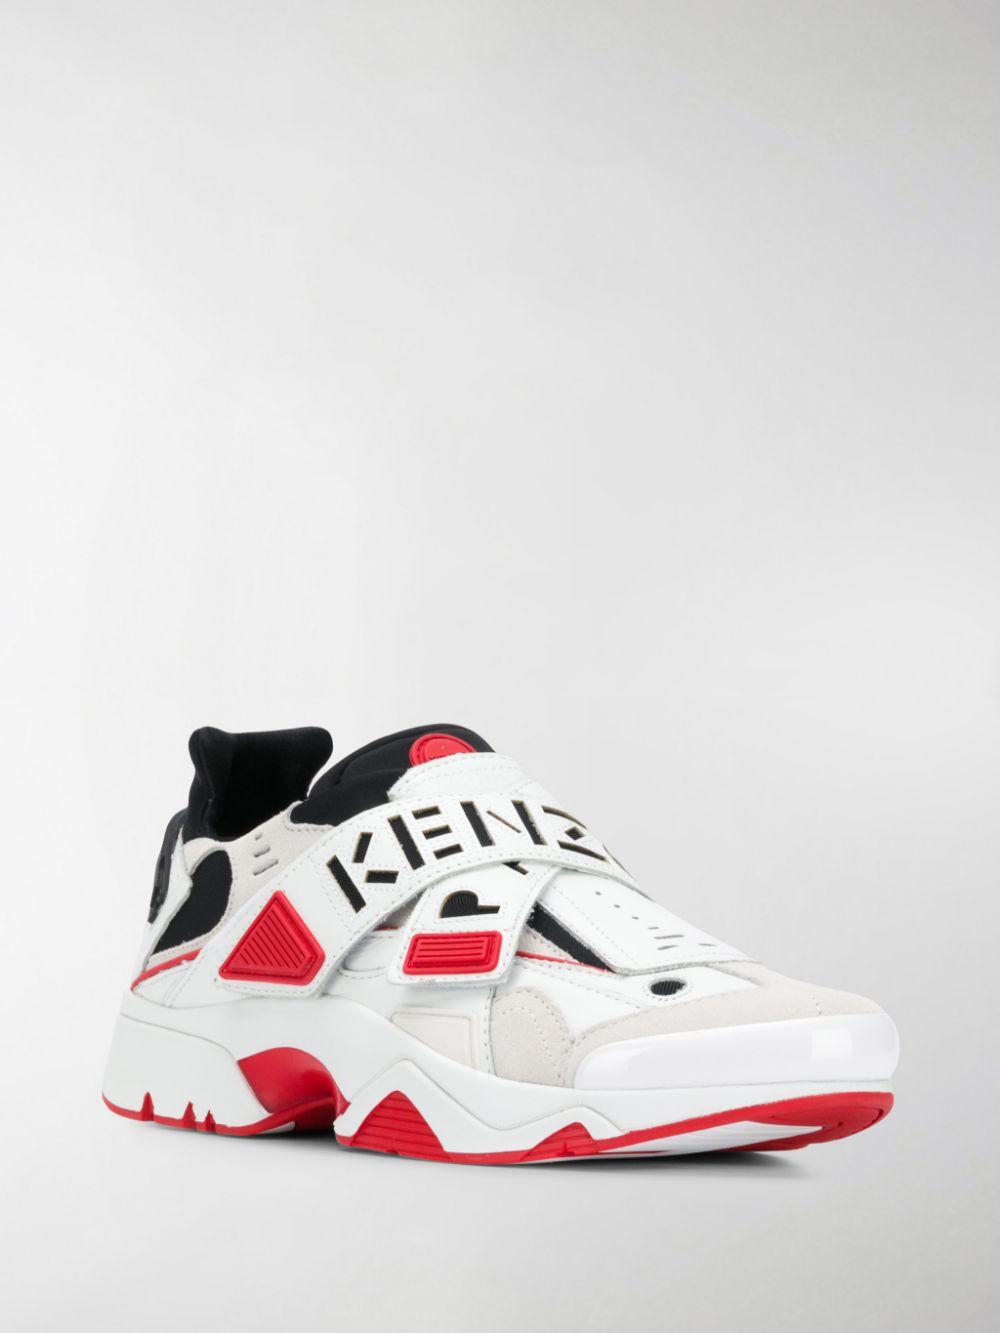 KENZO Leather Sonic Velcro Sneakers In White And Red for Men | Lyst